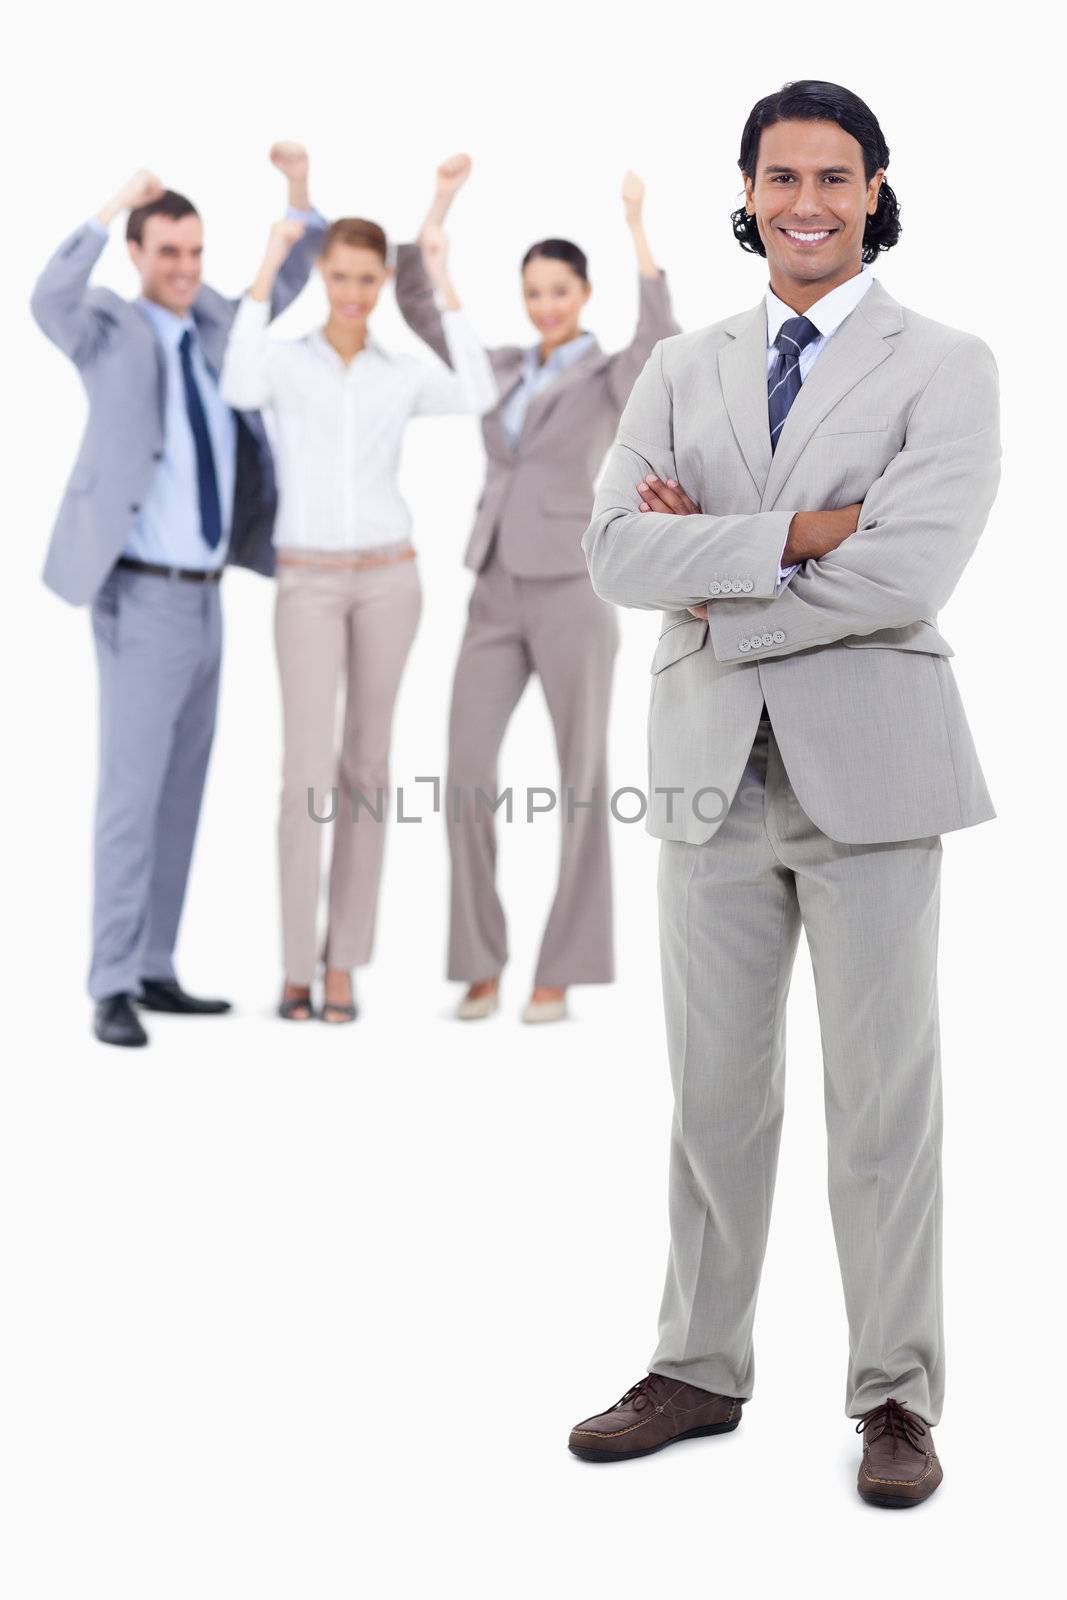 Businessman smiling and crossing his arms with cheering people behind him against white background